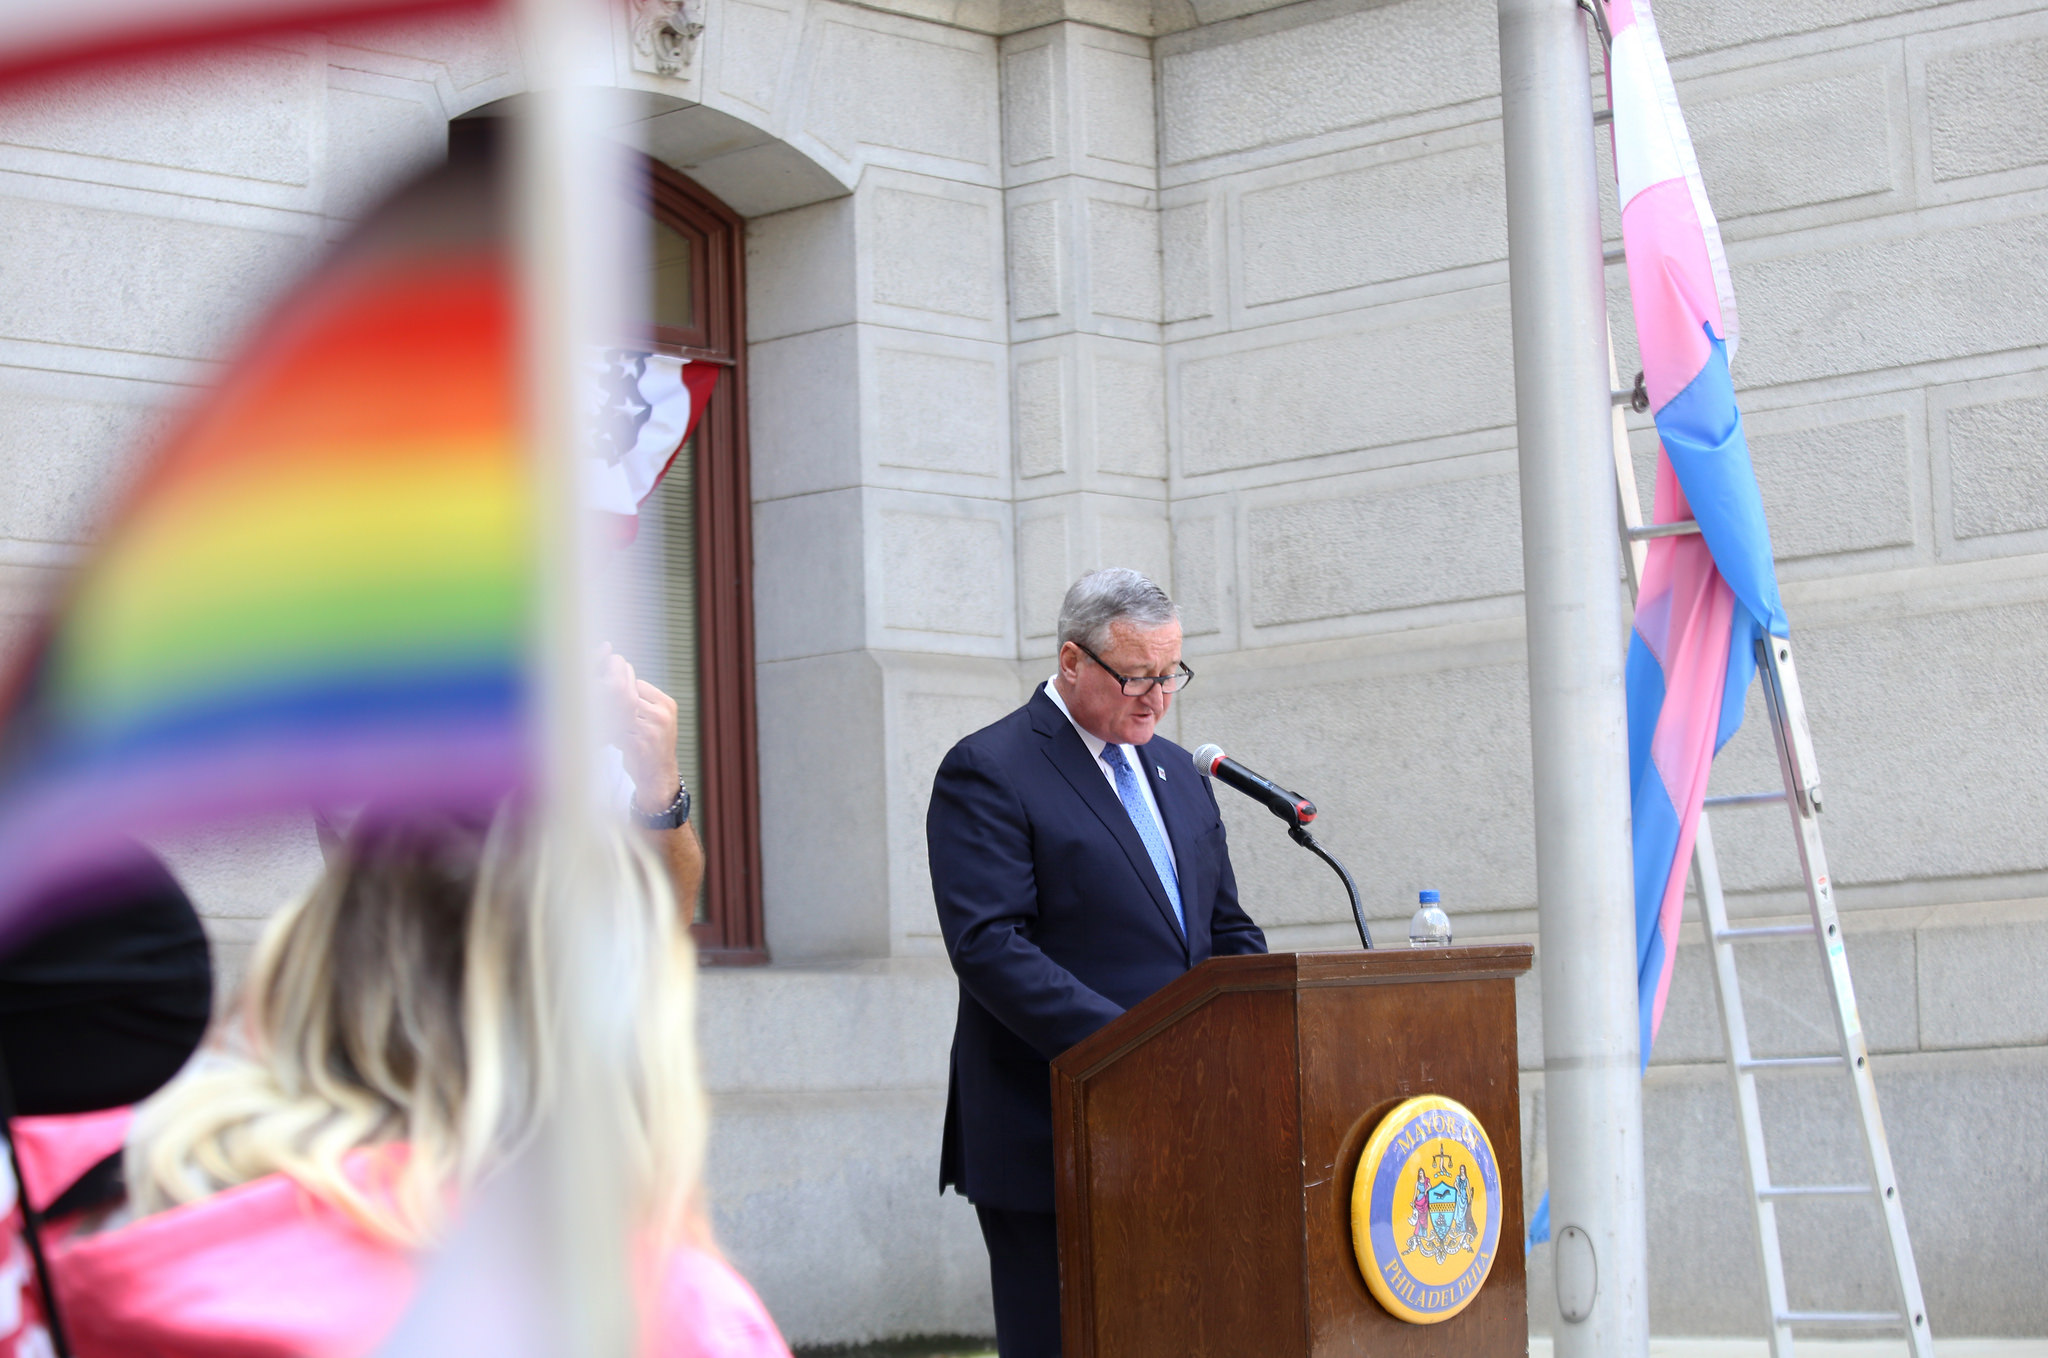 Mayor Kenney speaks in between an LGBTQ pride flag, with additional black and brown stripes representing people of color, and a trans pride flag at City Hall.